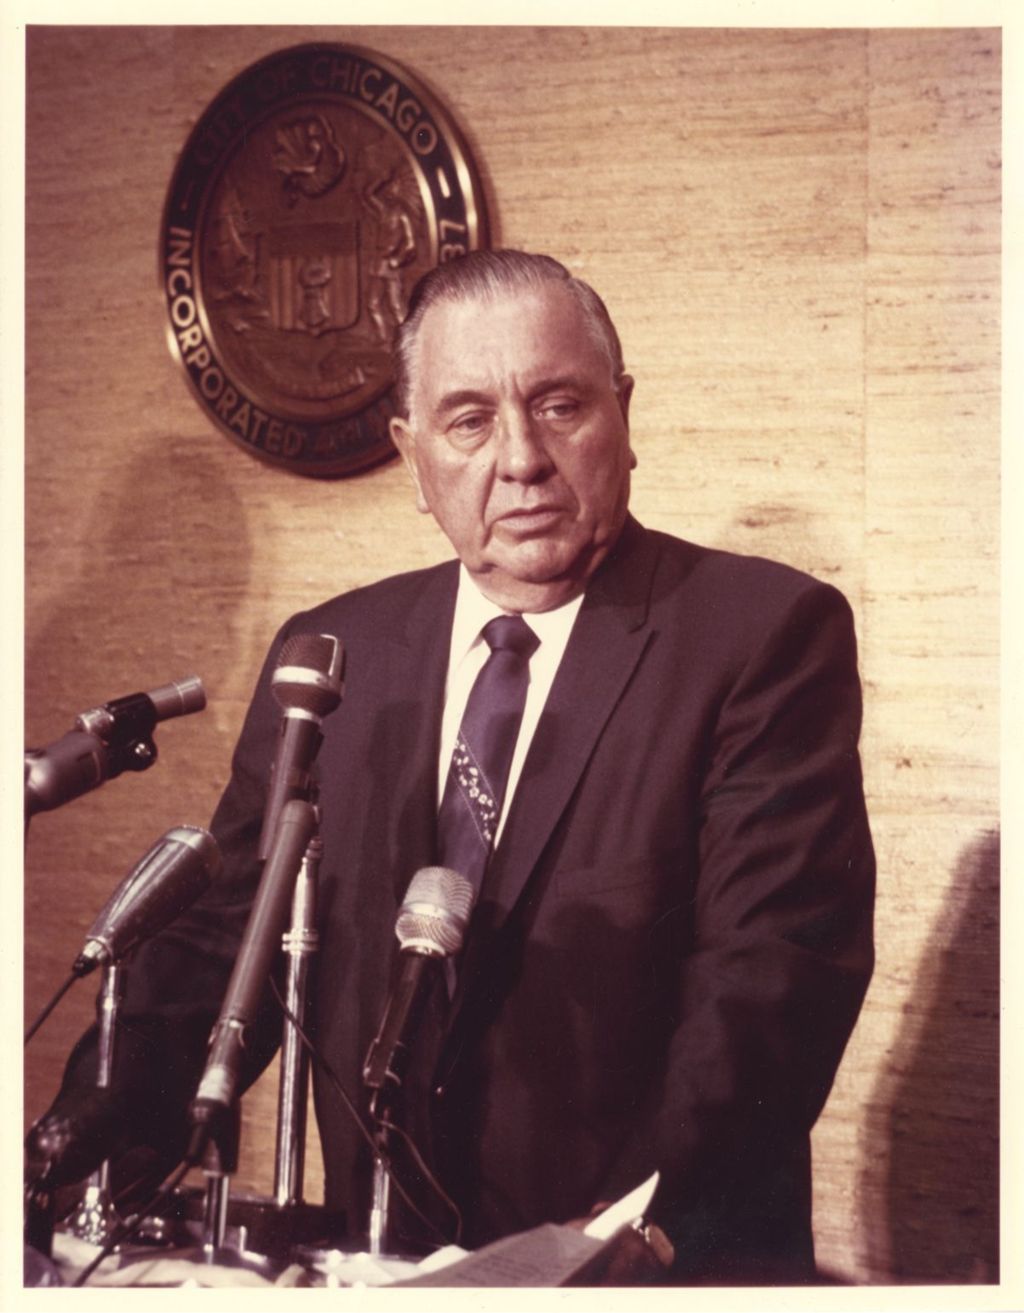 Richard J. Daley at a podium with a bank of microphones